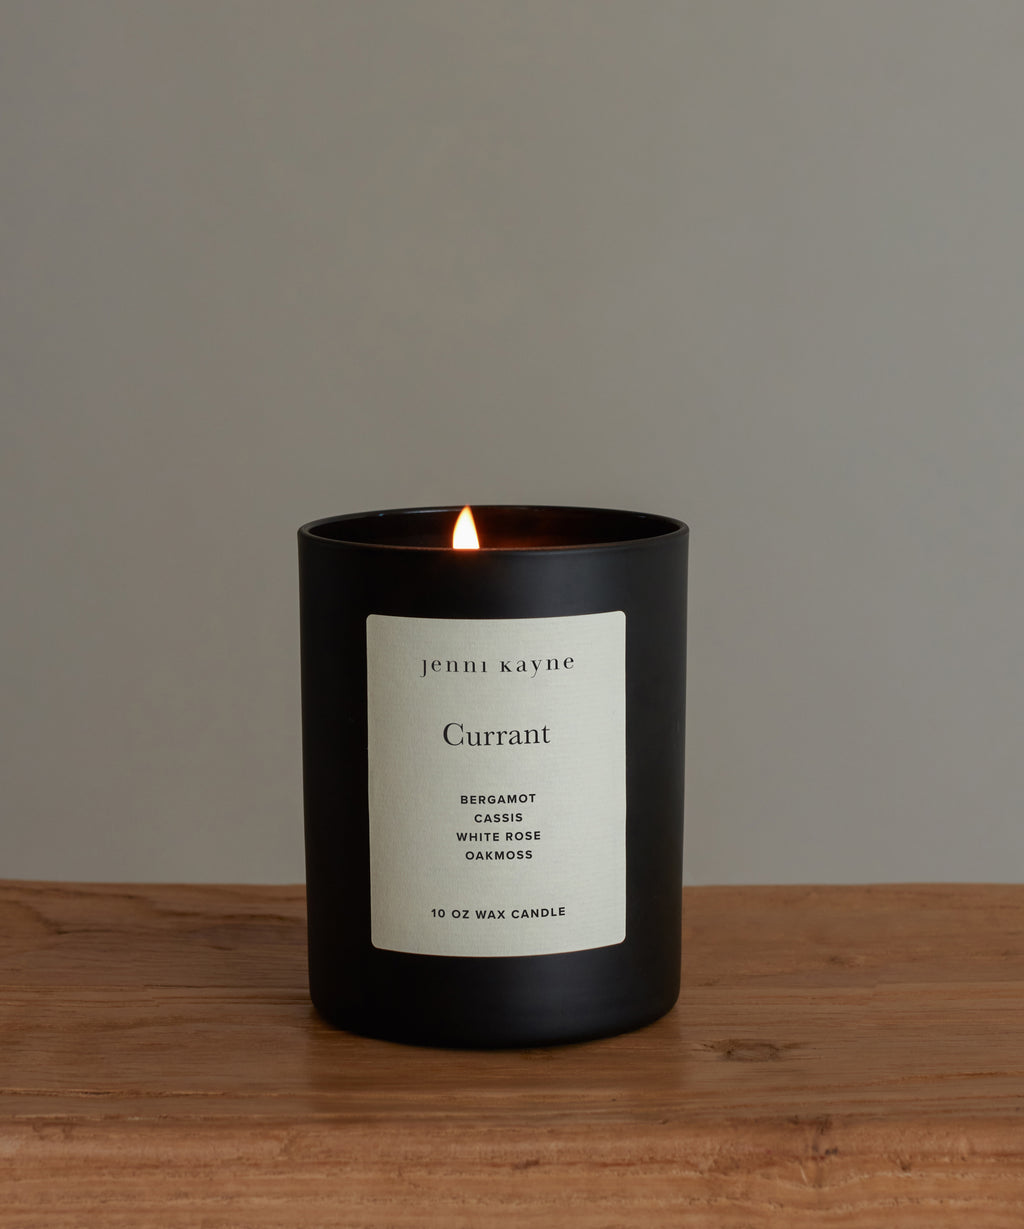 Blossom Scented Candle  The Little Market Blossom Candle I Coco